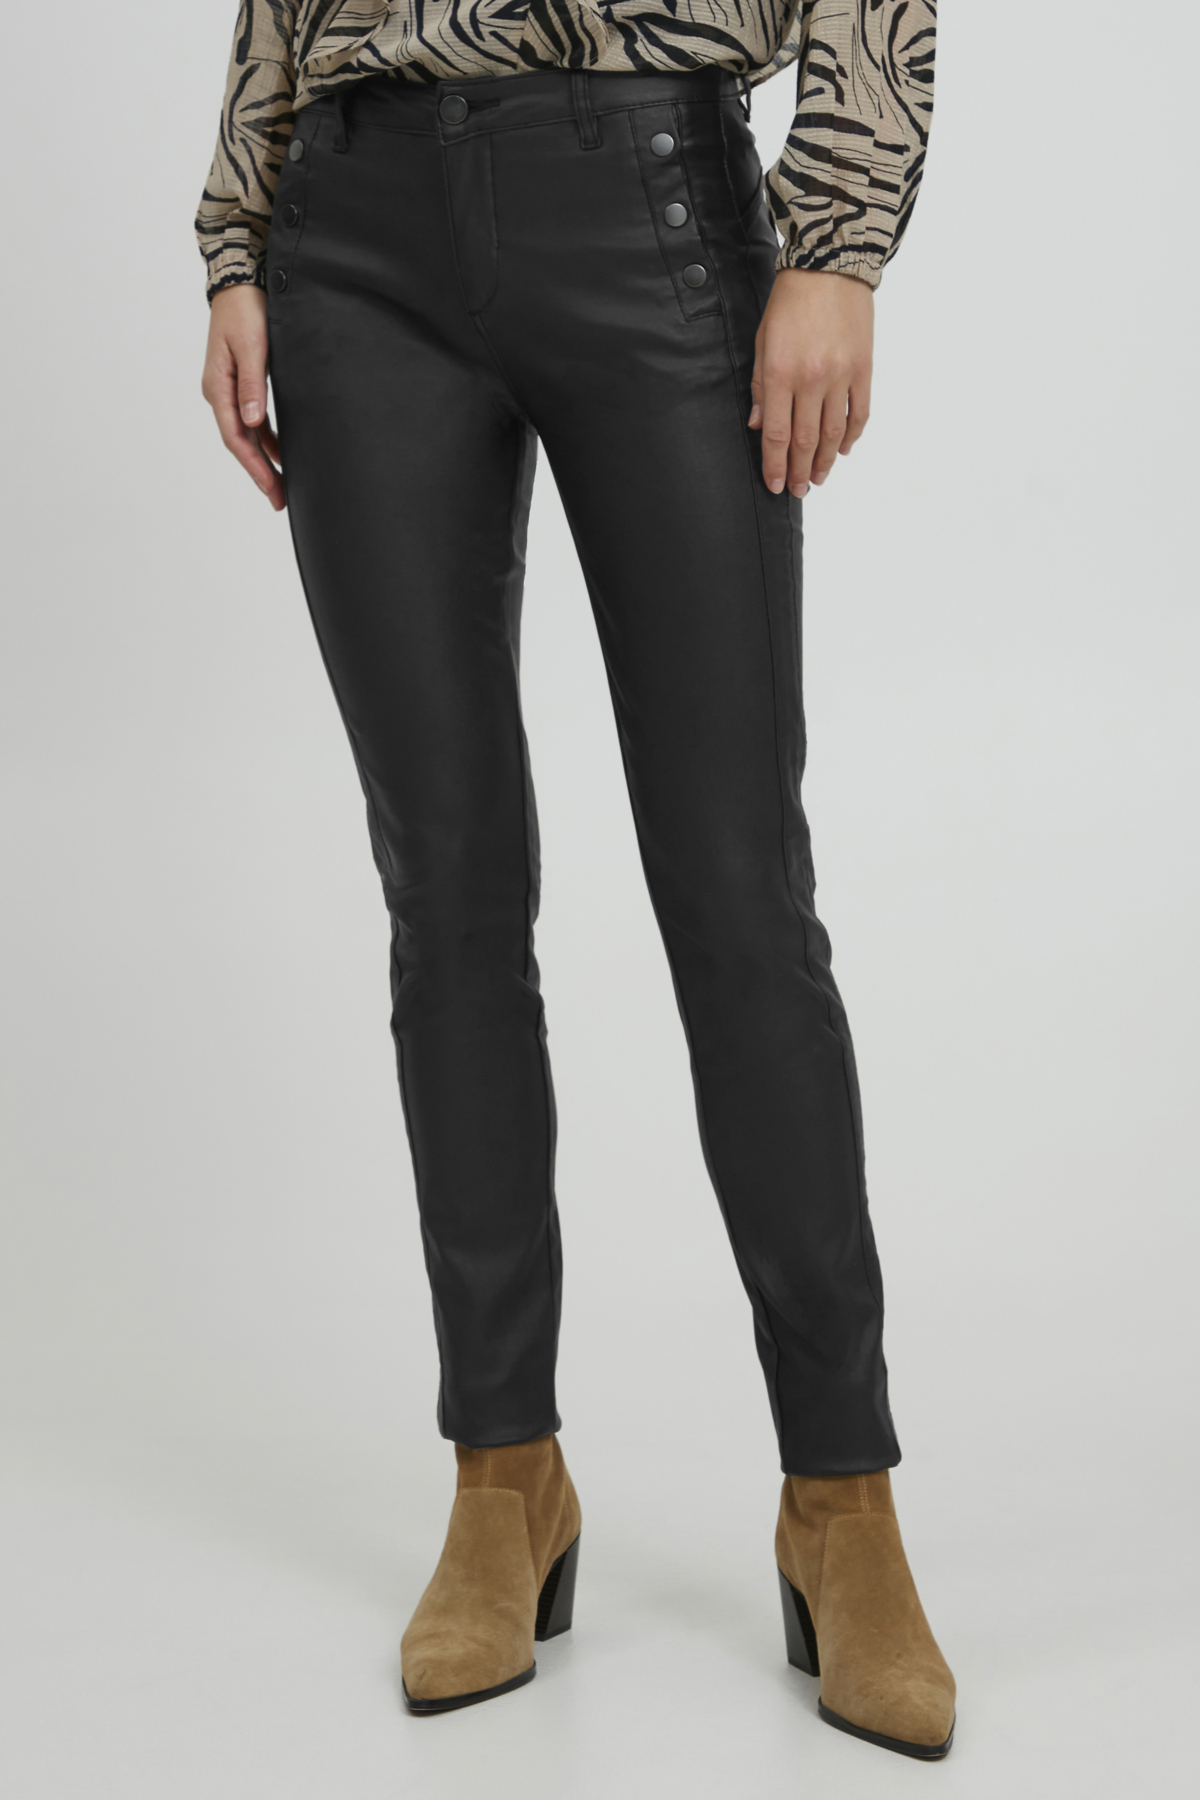 Jeans Bukser Haugsted & - Frdotalin Fransa Pants - By